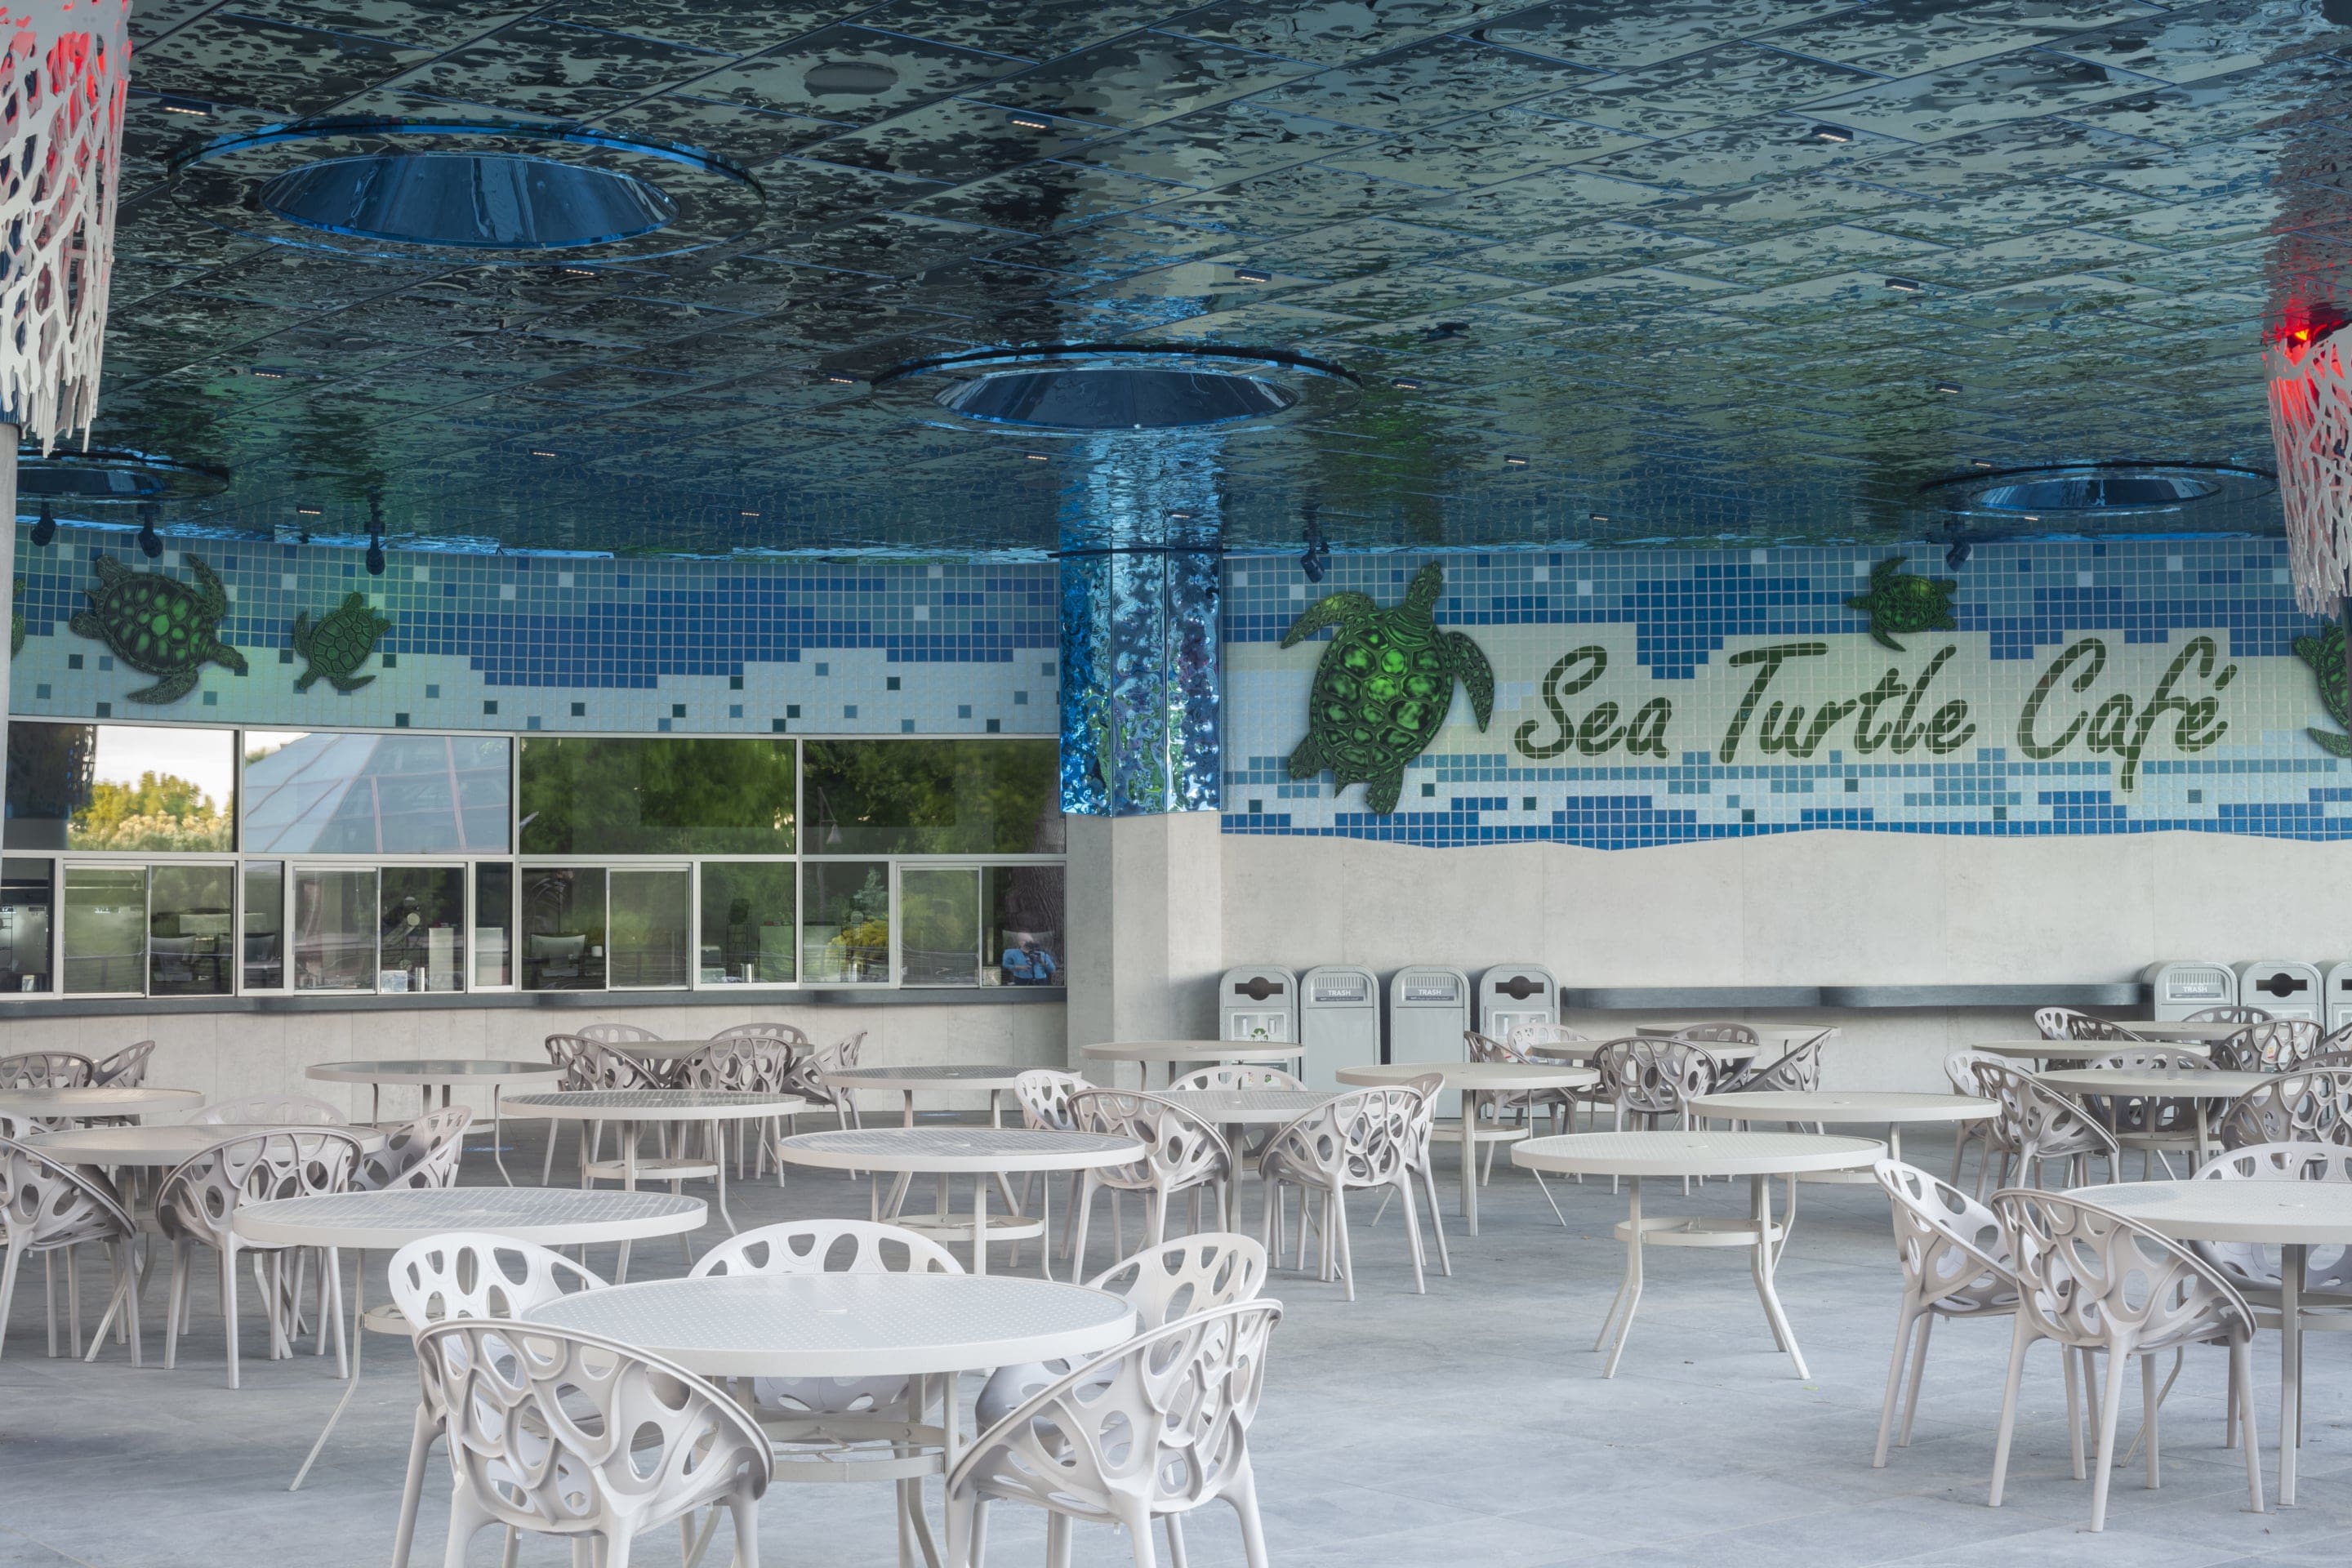 Custom rippled blue stainless steel clads the ceiling of the outdoor cafe to create an underwater feel to the space.